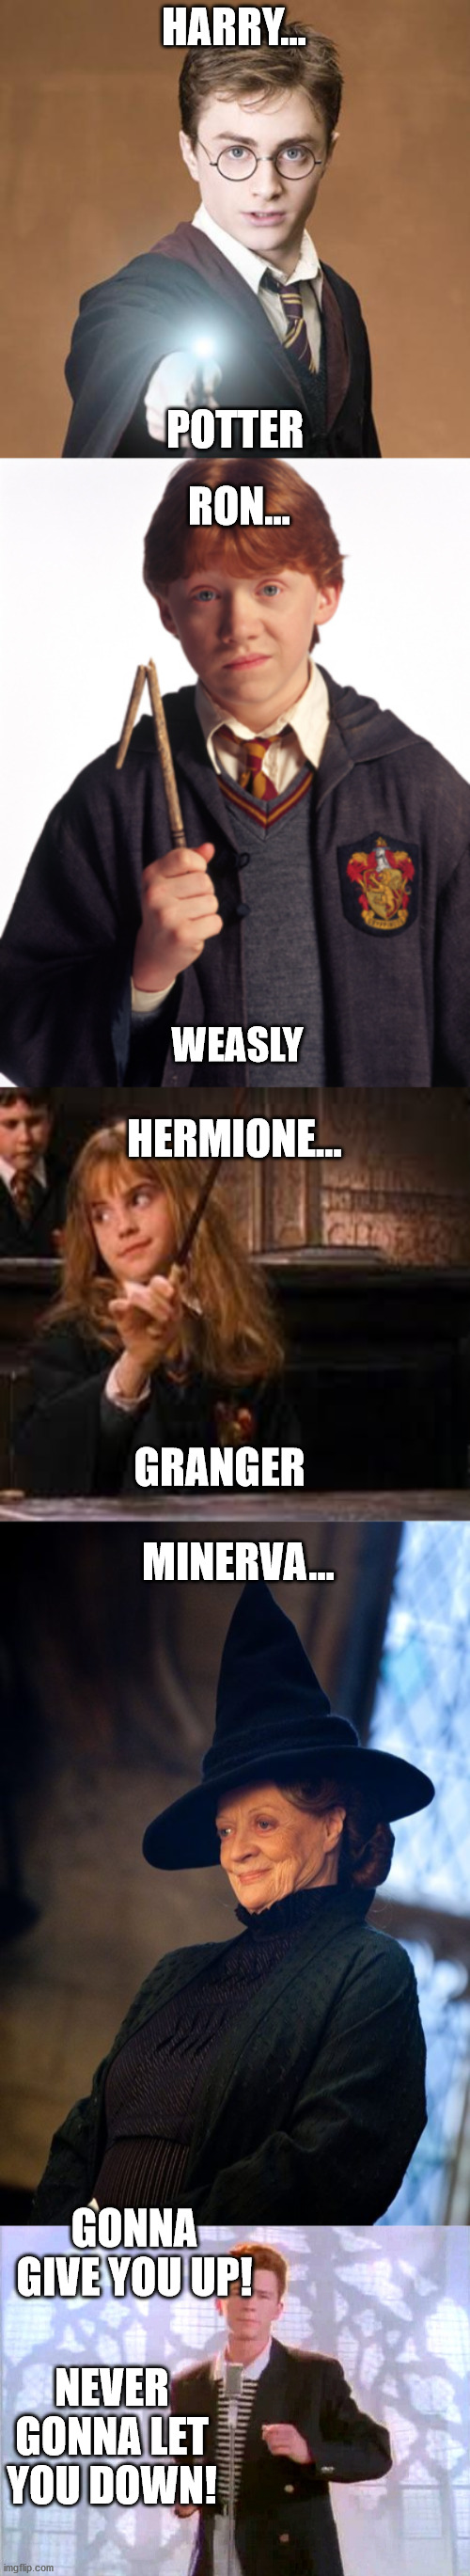 Harry Potter | HARRY... POTTER; RON... WEASLY; HERMIONE... GRANGER; MINERVA... GONNA GIVE YOU UP! NEVER GONNA LET YOU DOWN! | image tagged in harry potter casting a spell,ron weasley broken wand,hermione,minerva mcgonagall | made w/ Imgflip meme maker